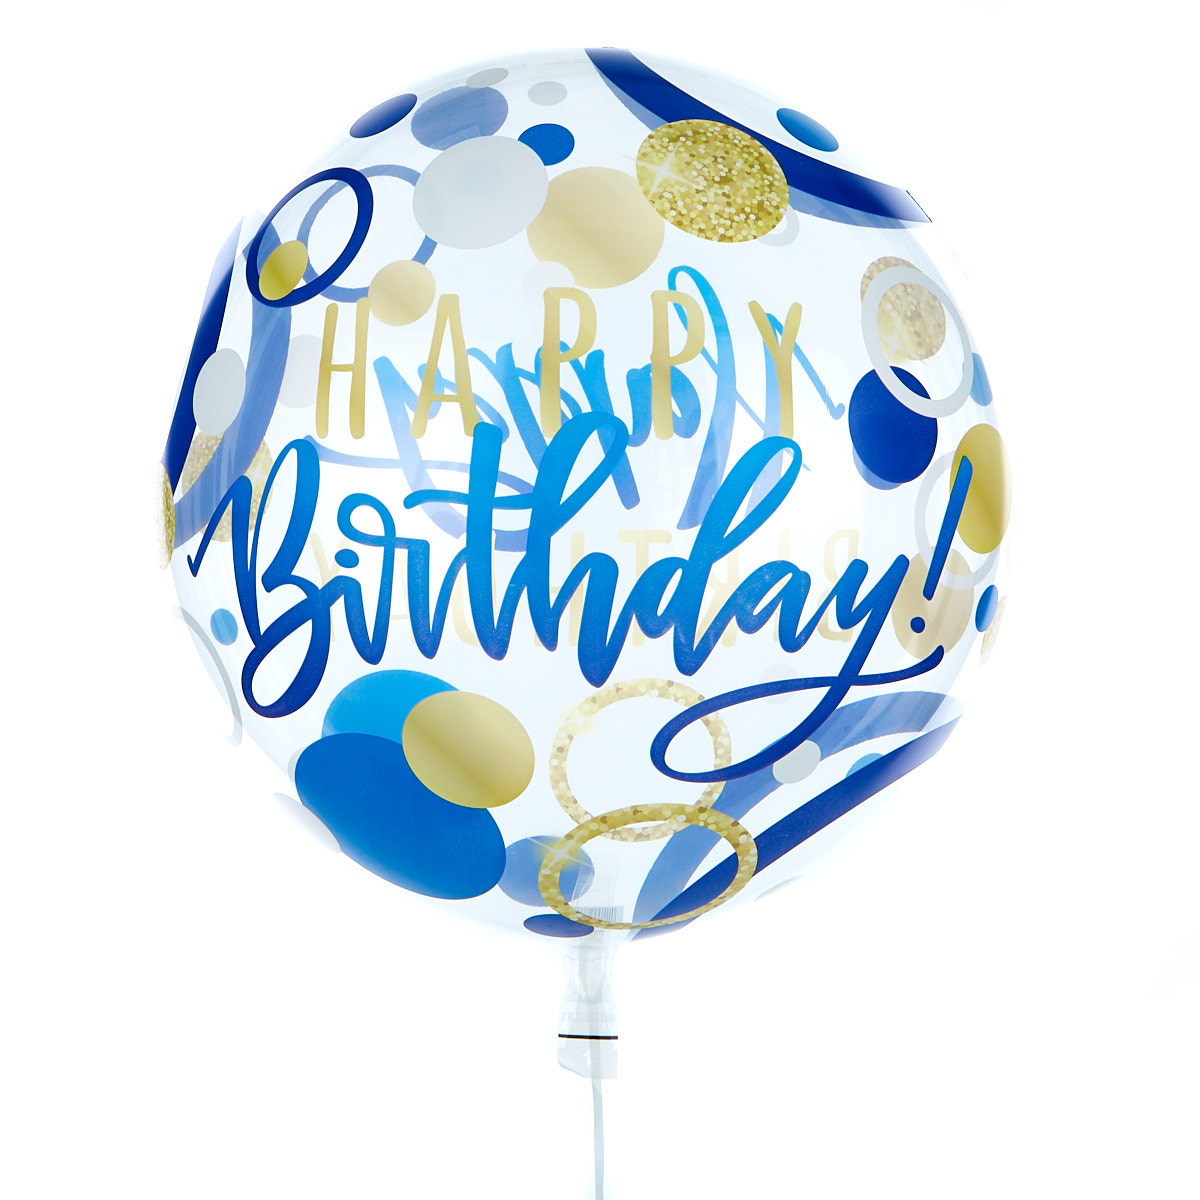 22-Inch Bubble Balloon - Happy Birthday, Blue & Gold Spots - DELIVERED INFLATED!